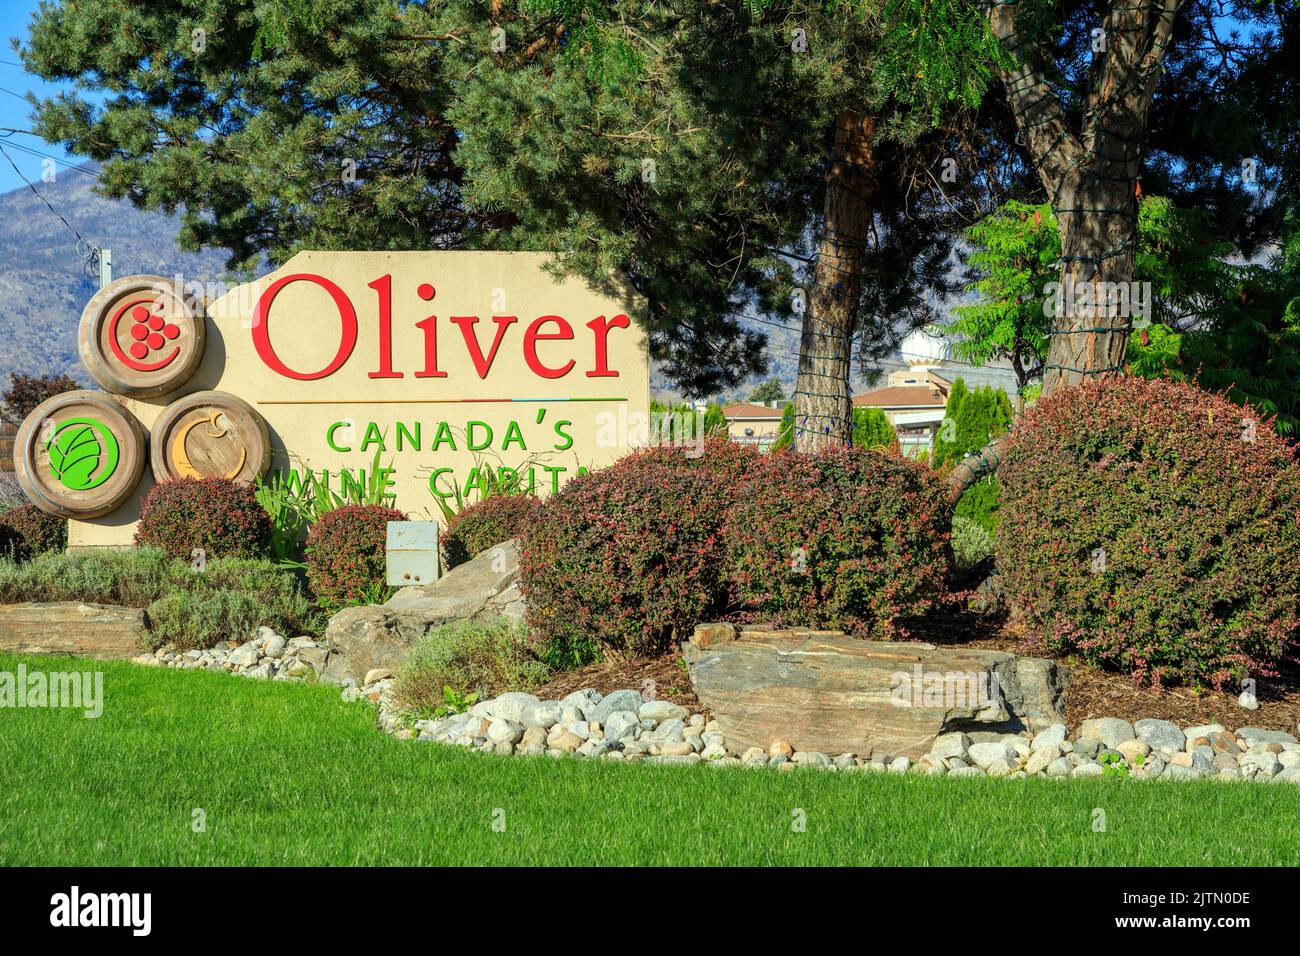 Oliver, British Columbia, Canada - August 28, 2022: 'Canada's Wine Capital' sign on Highway 97 at the entrance to the small town of Oliver, British Co Stock Photo